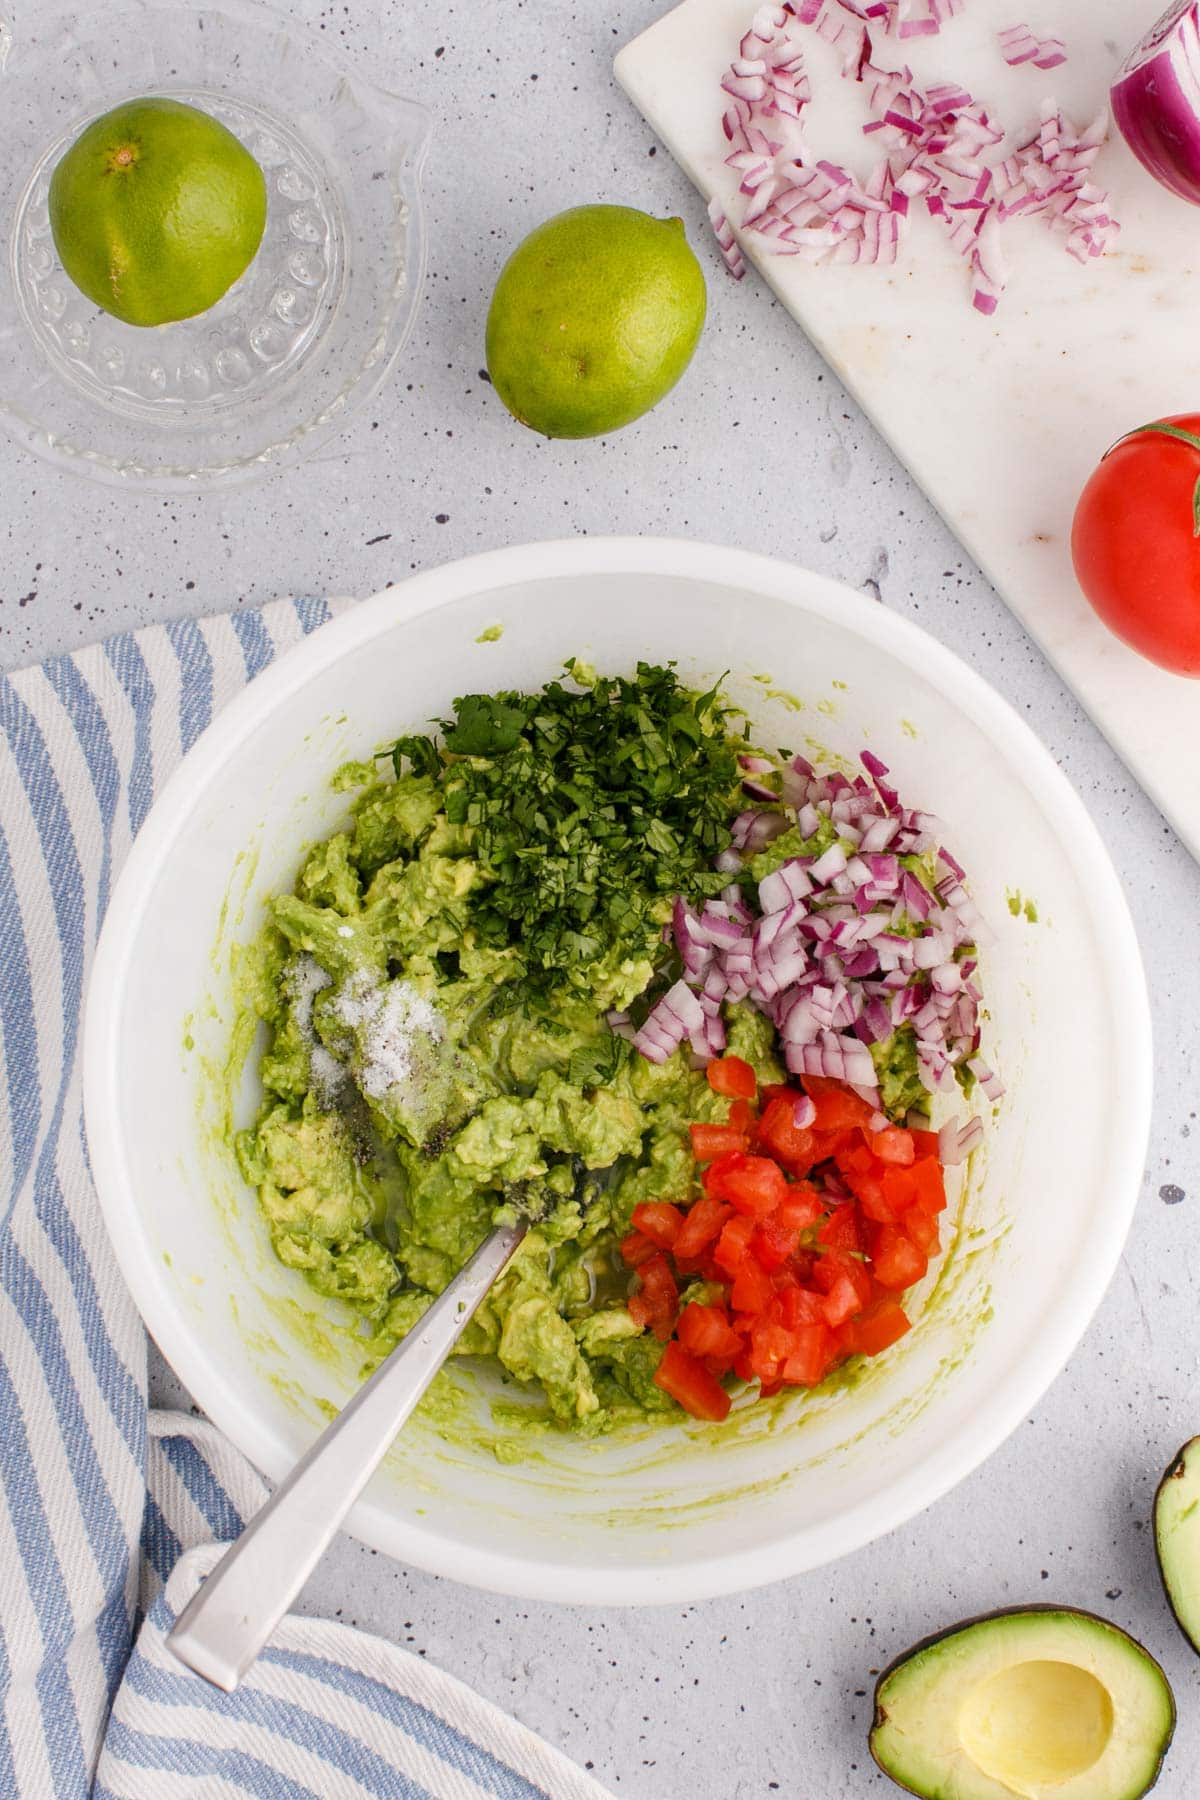 Bowl of mashed avocado, diced tomato, chopped cilantro and diced onion.